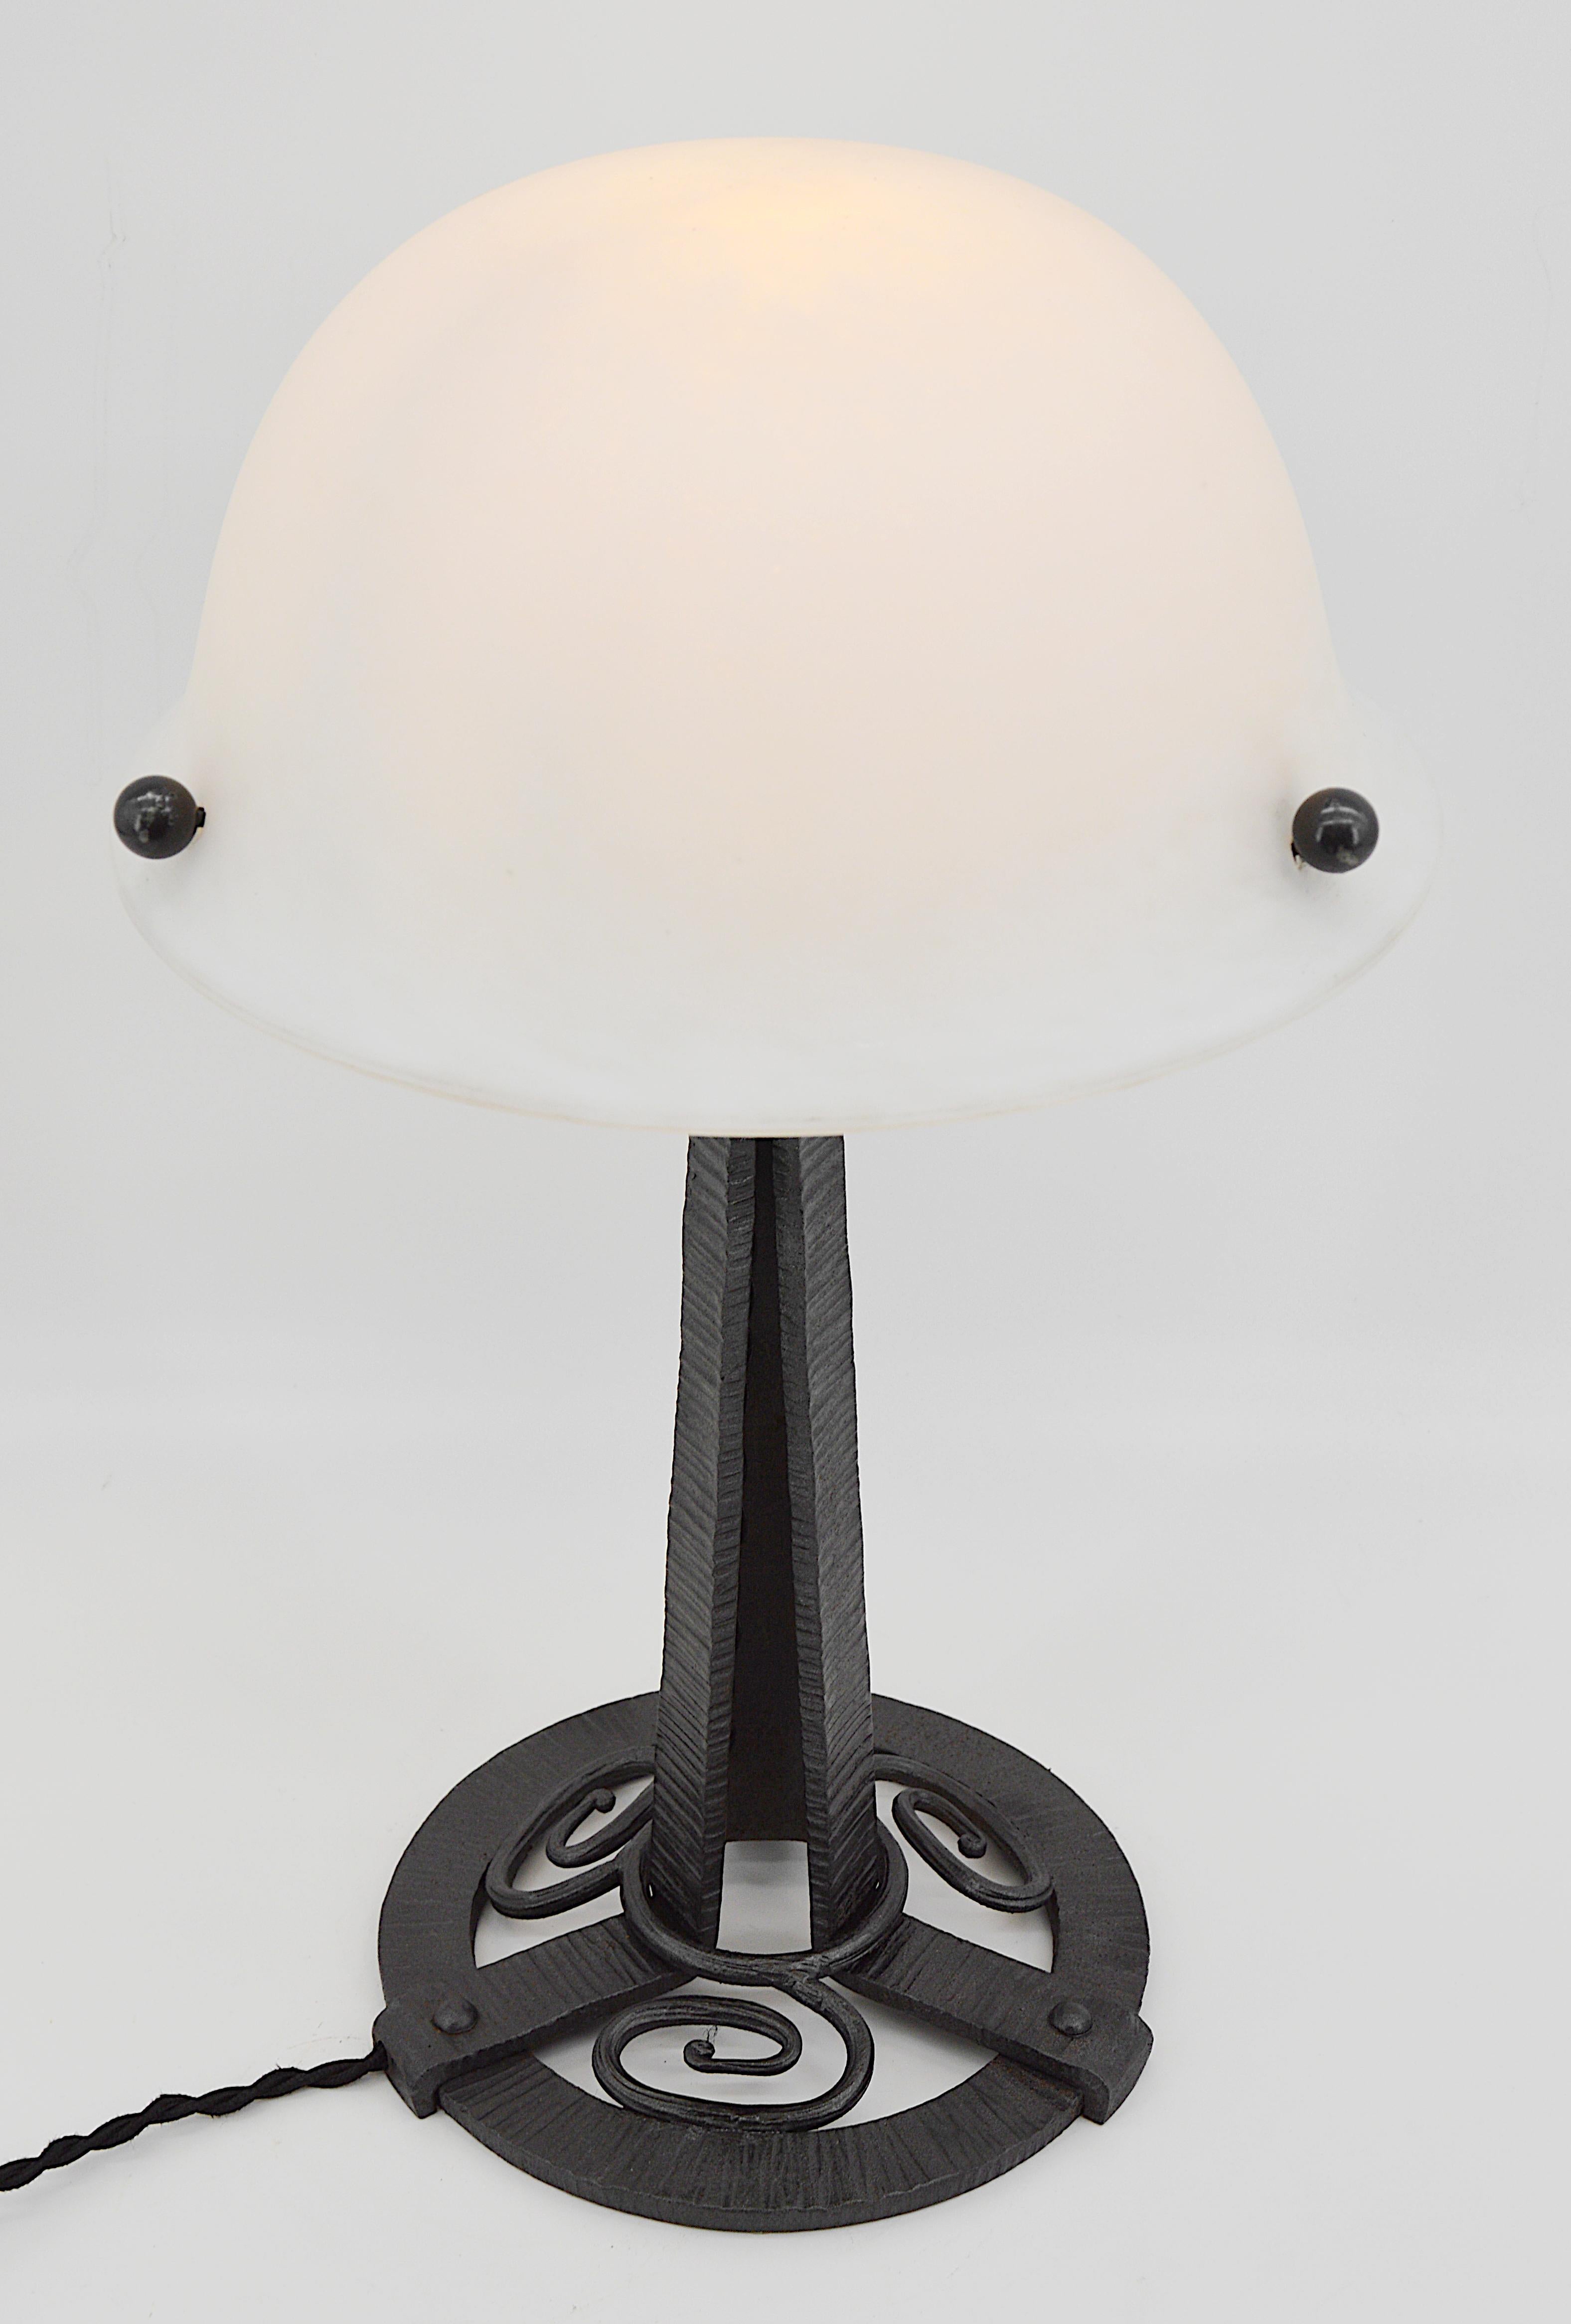 Glass French Art Deco Table Lamp, circa 1925 For Sale